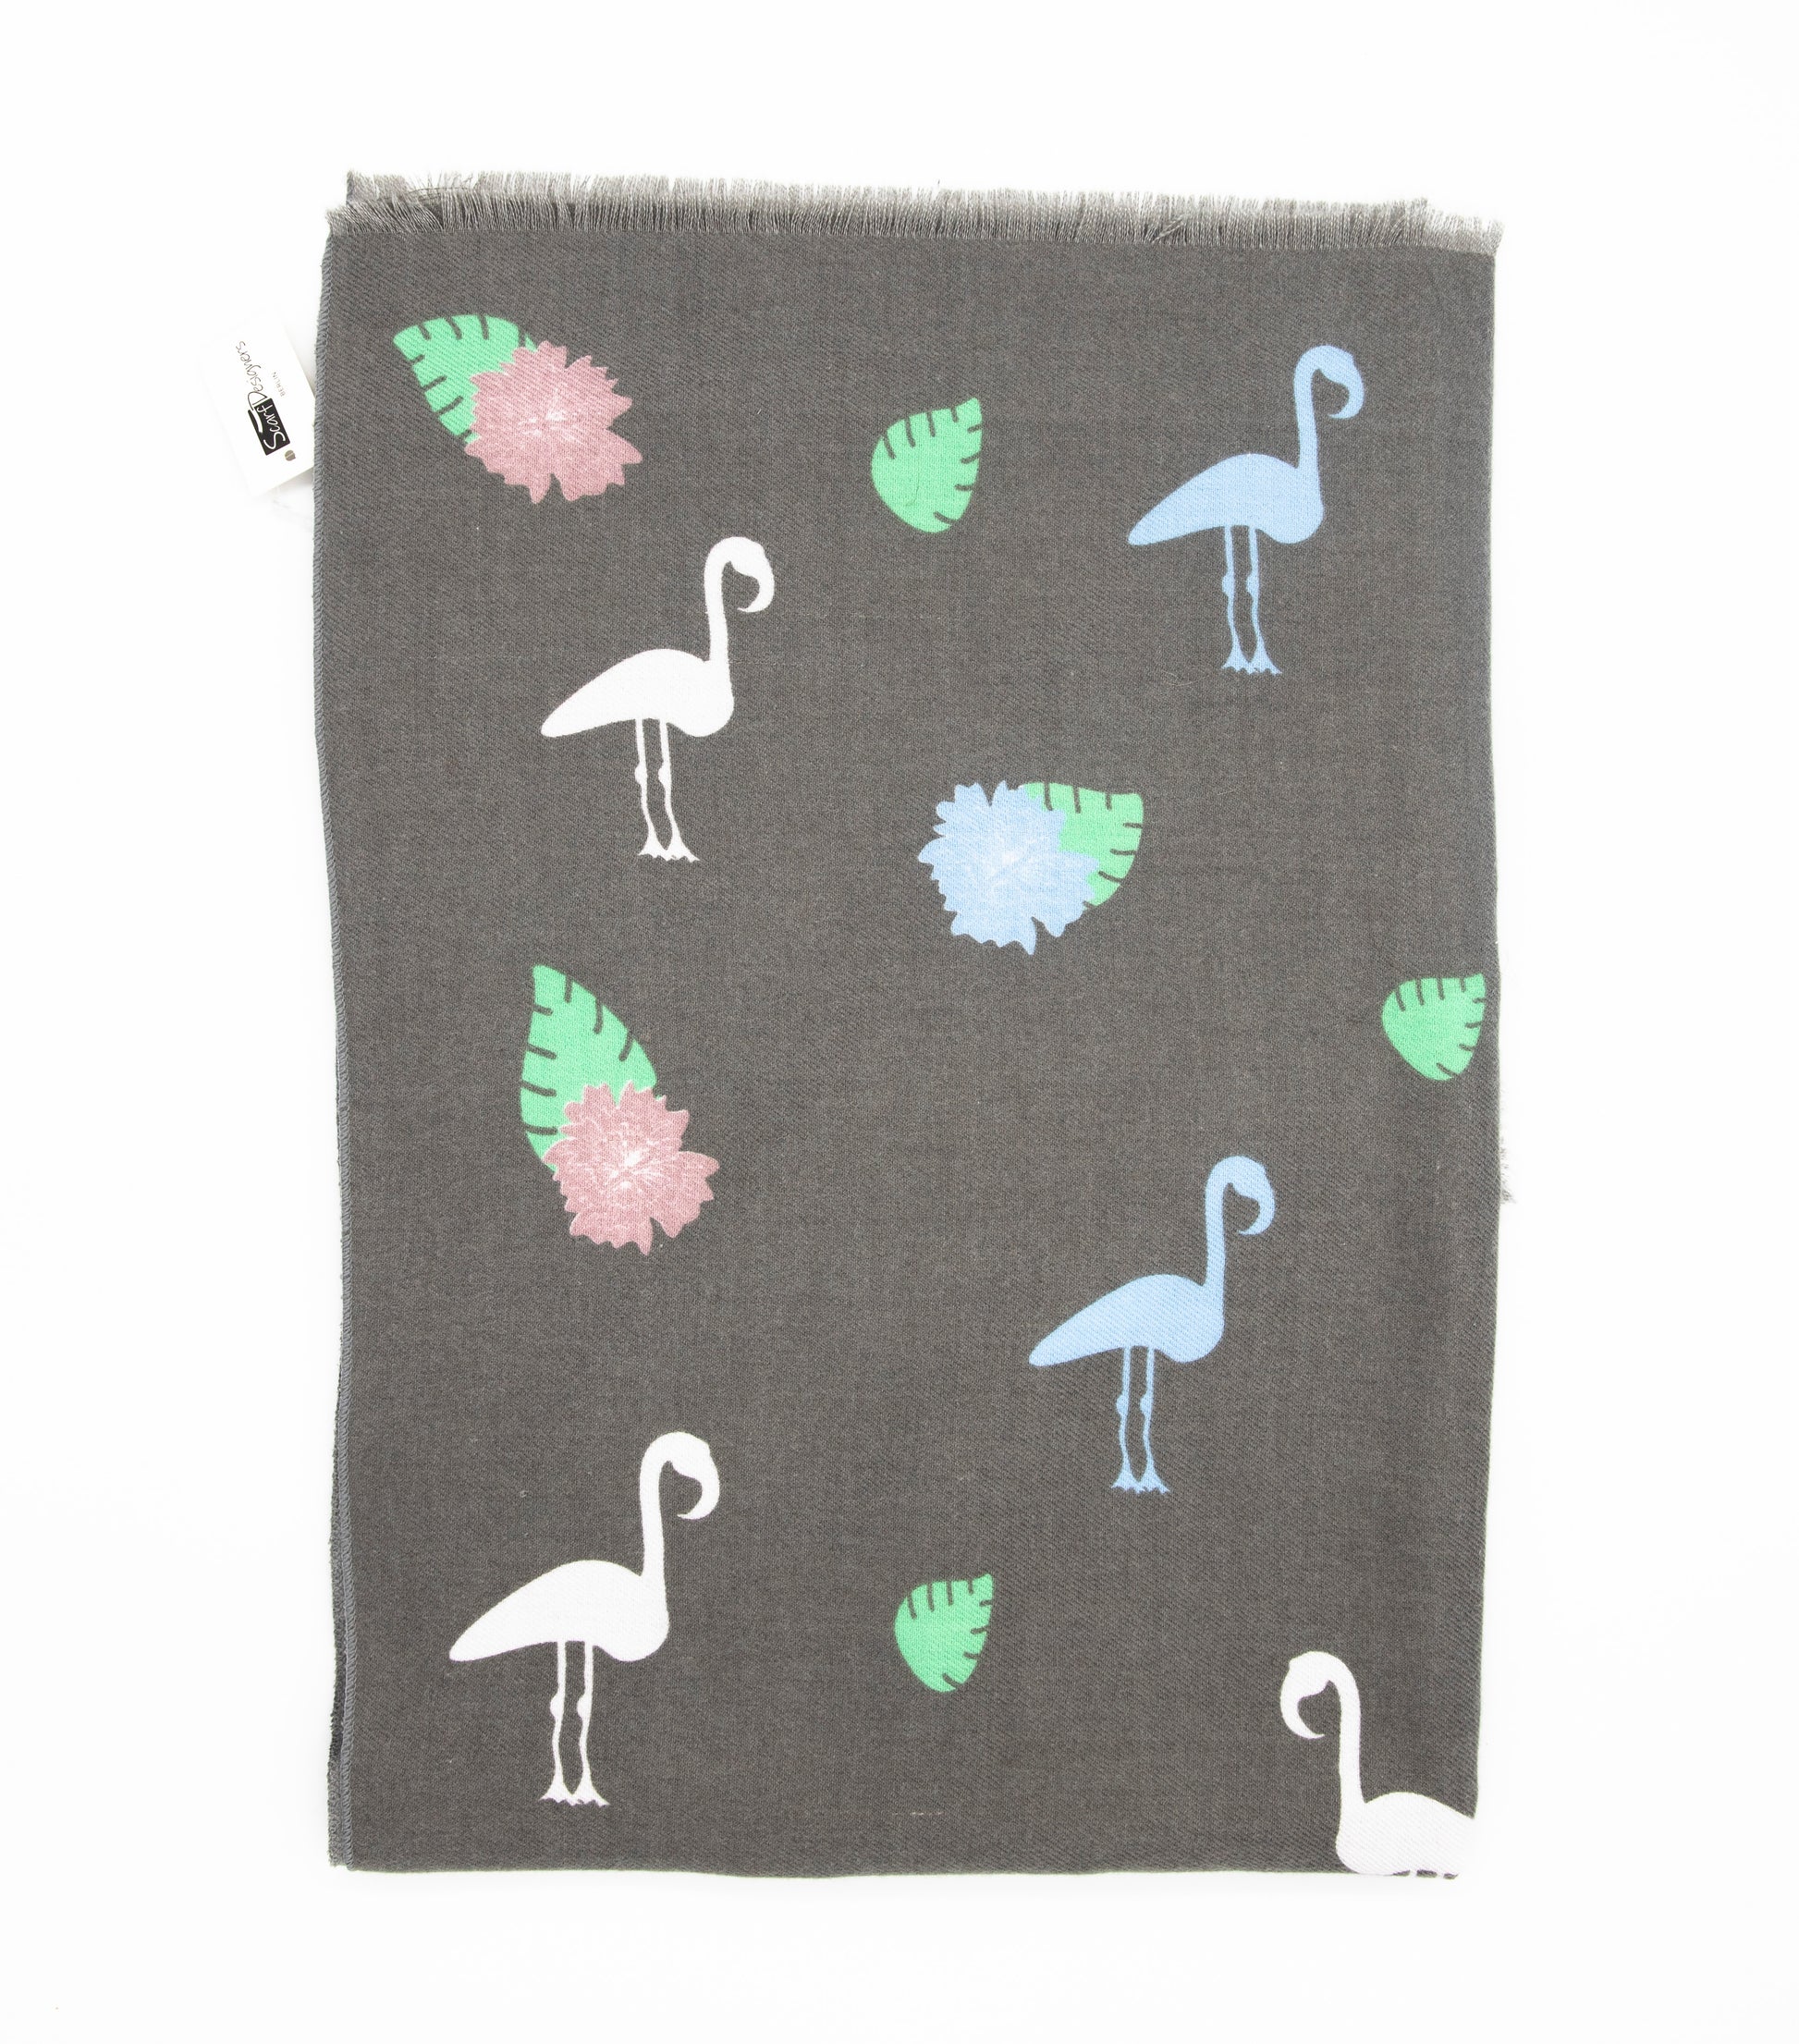 This is a warm and soft cotton scarf for women with always fashionable flamingos and exotic floral pattern made from special cotton blend that gives you a wonderful cashmere-like feeling without hurting animals. This is a completely vegan and cruelty free scarf certified by PETA and a perfect gift idea for women.